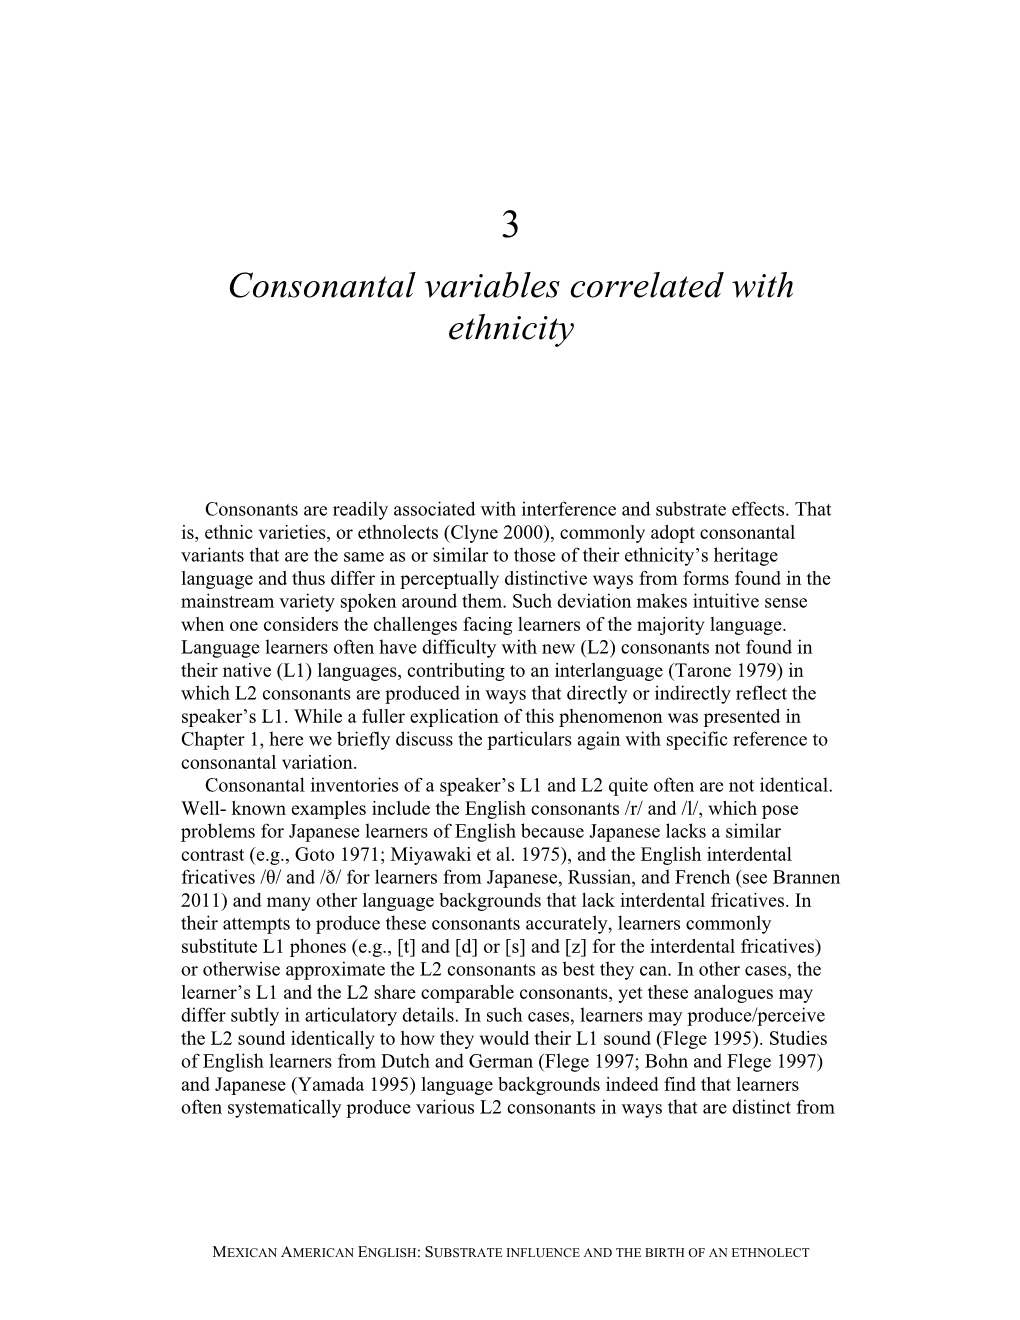 Consonantal Variables Correlated with Ethnicity